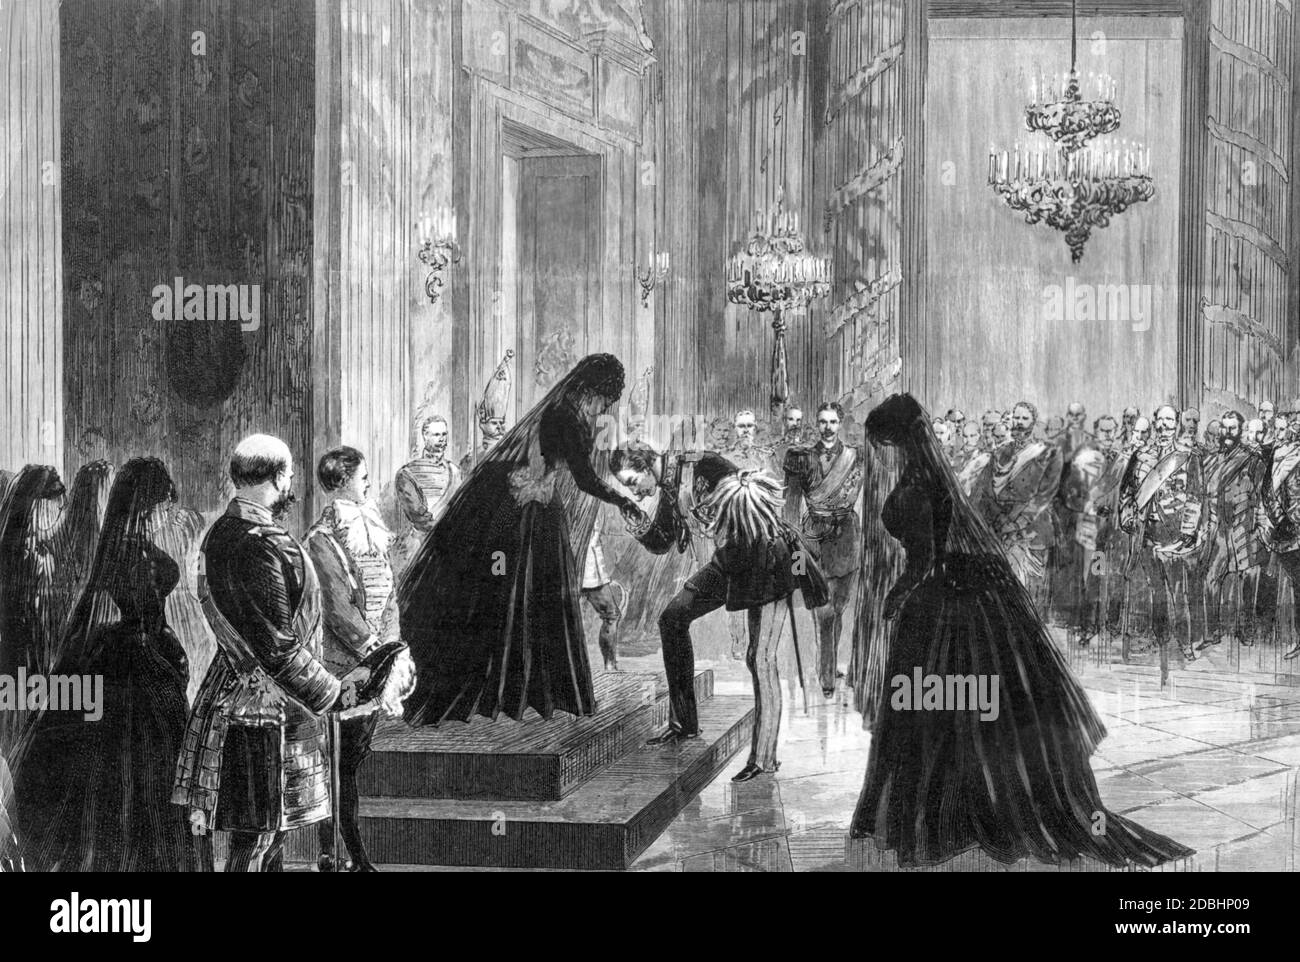 In this painting Emperor Wilhelm II (center) kisses the hand of his mother, Empress Victoria (born of Great Britain and Ireland). The painting depicts presumably the funeral service for the deceased Emperor Friedrich III in June 1888 in Potsdam. Stock Photo